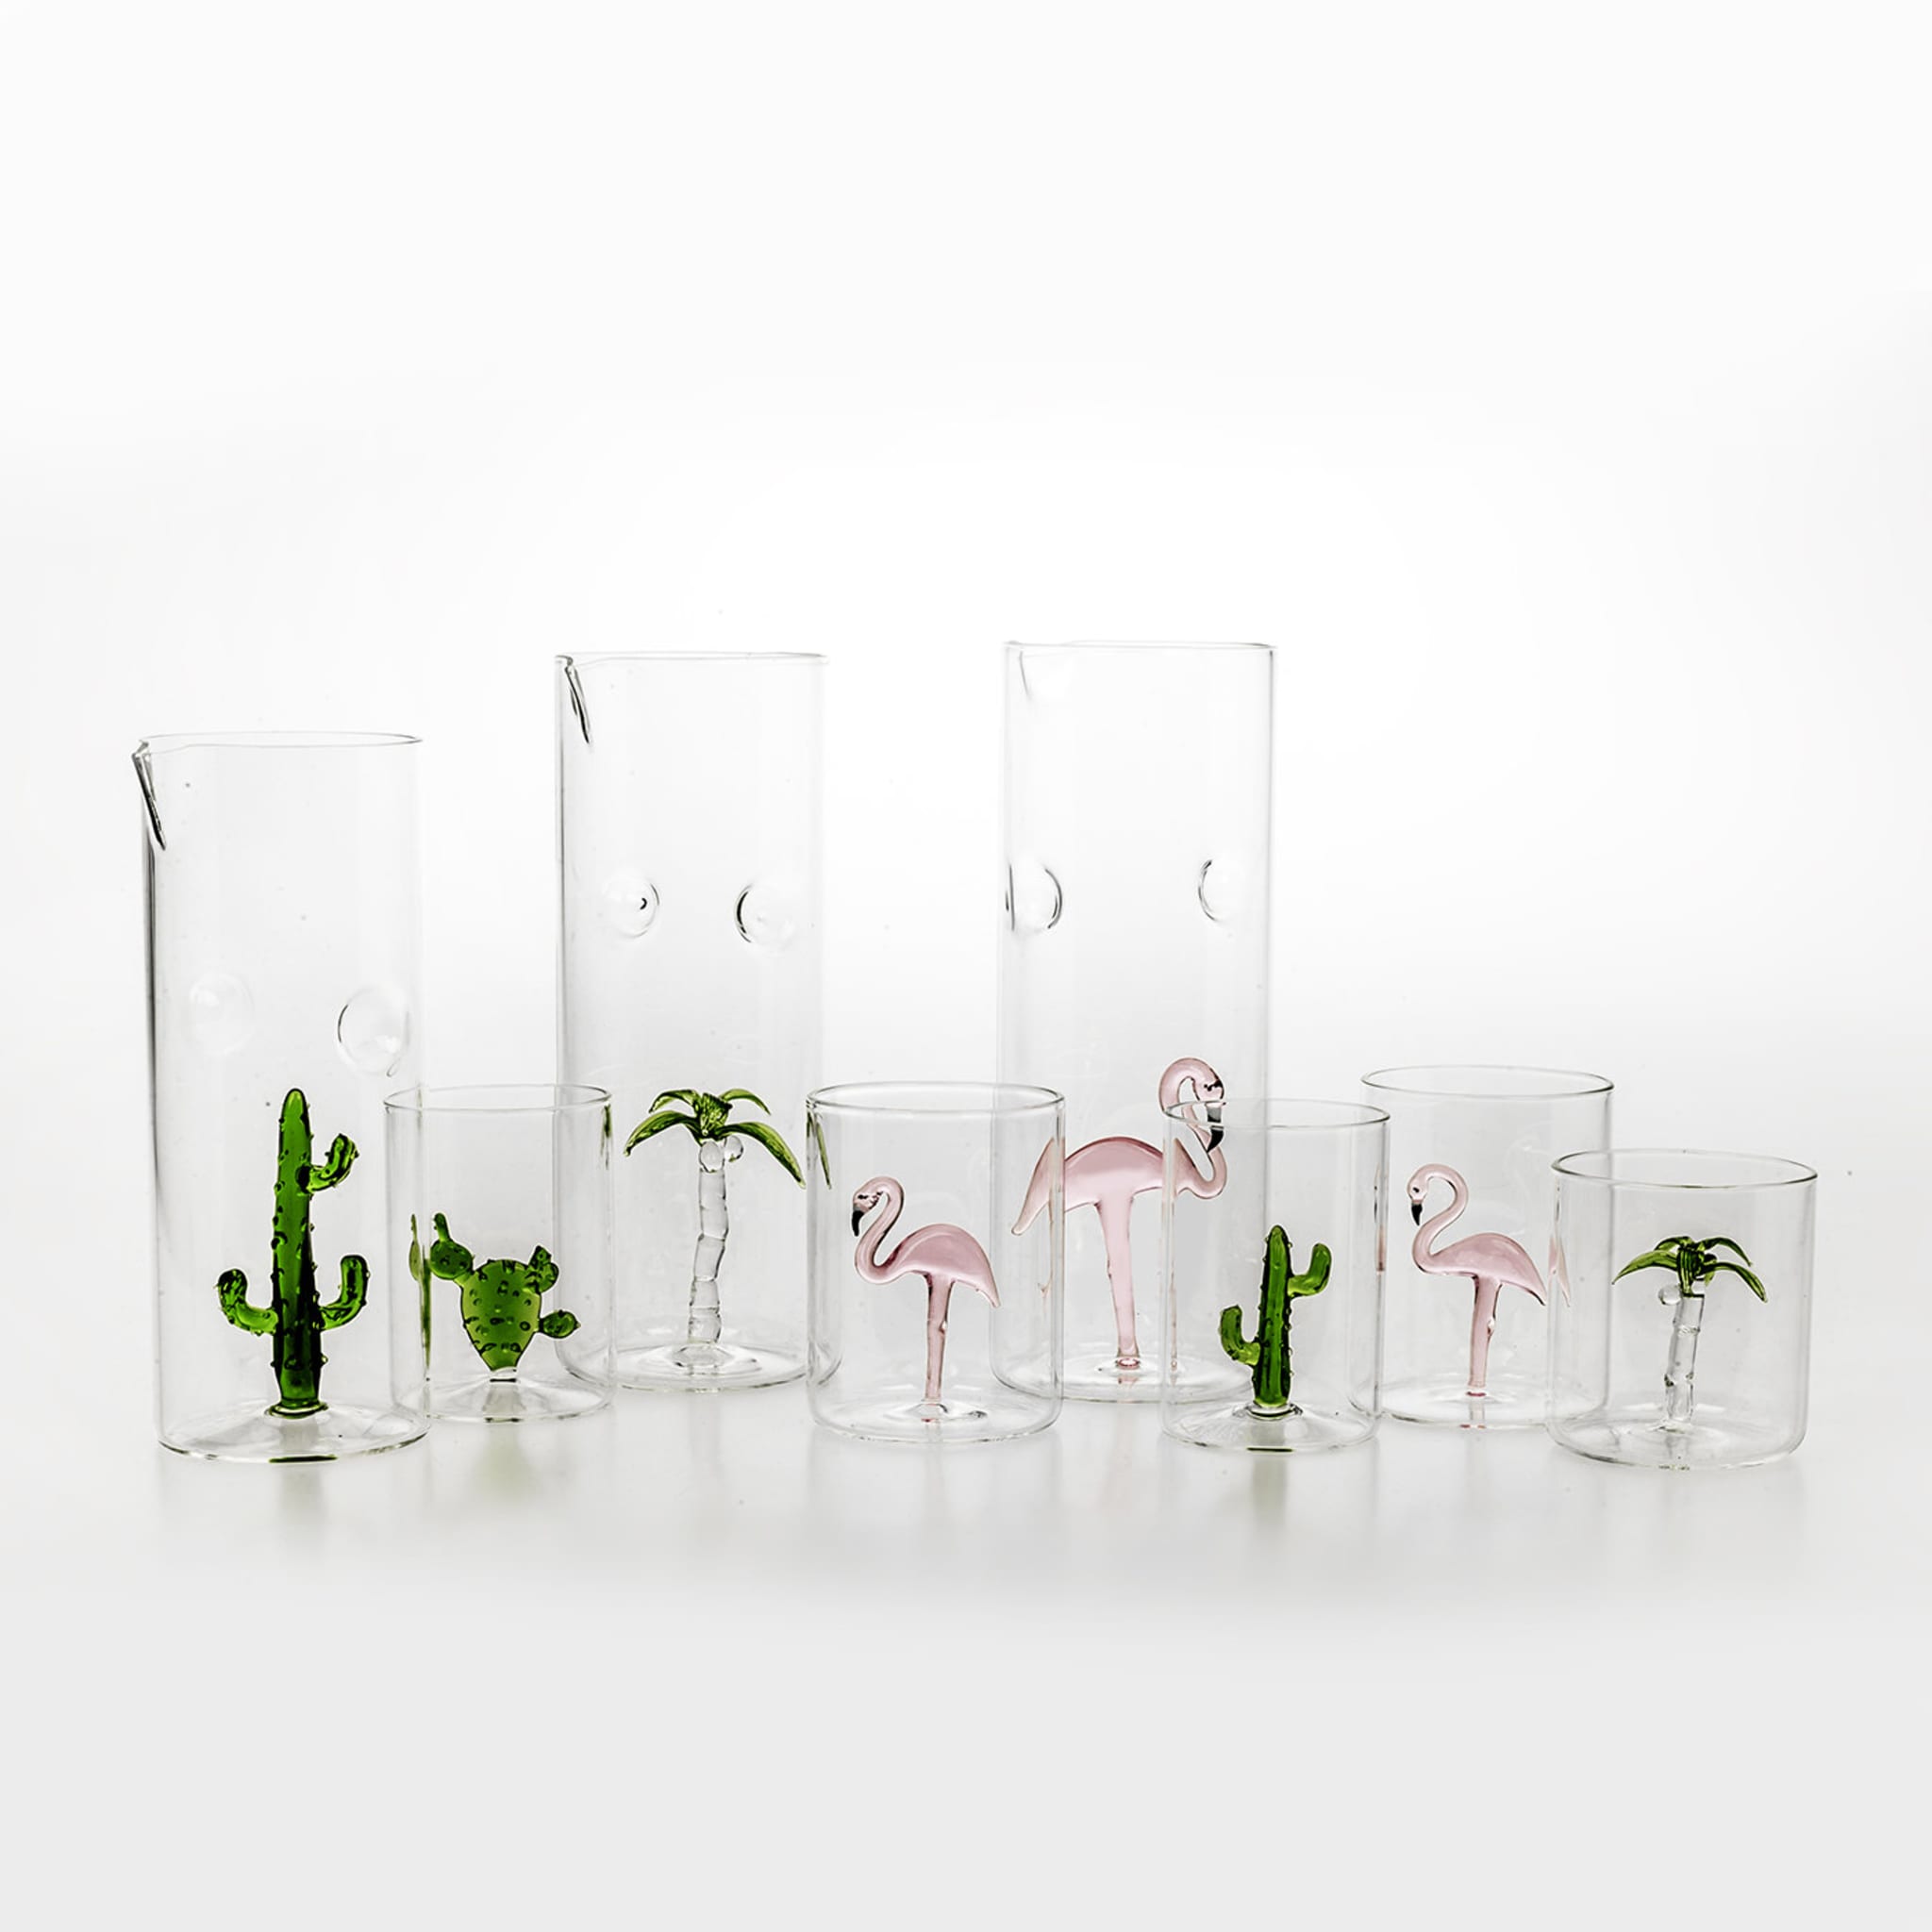 Cactus Set of 4 Glasses and Pitcher - Alternative view 1